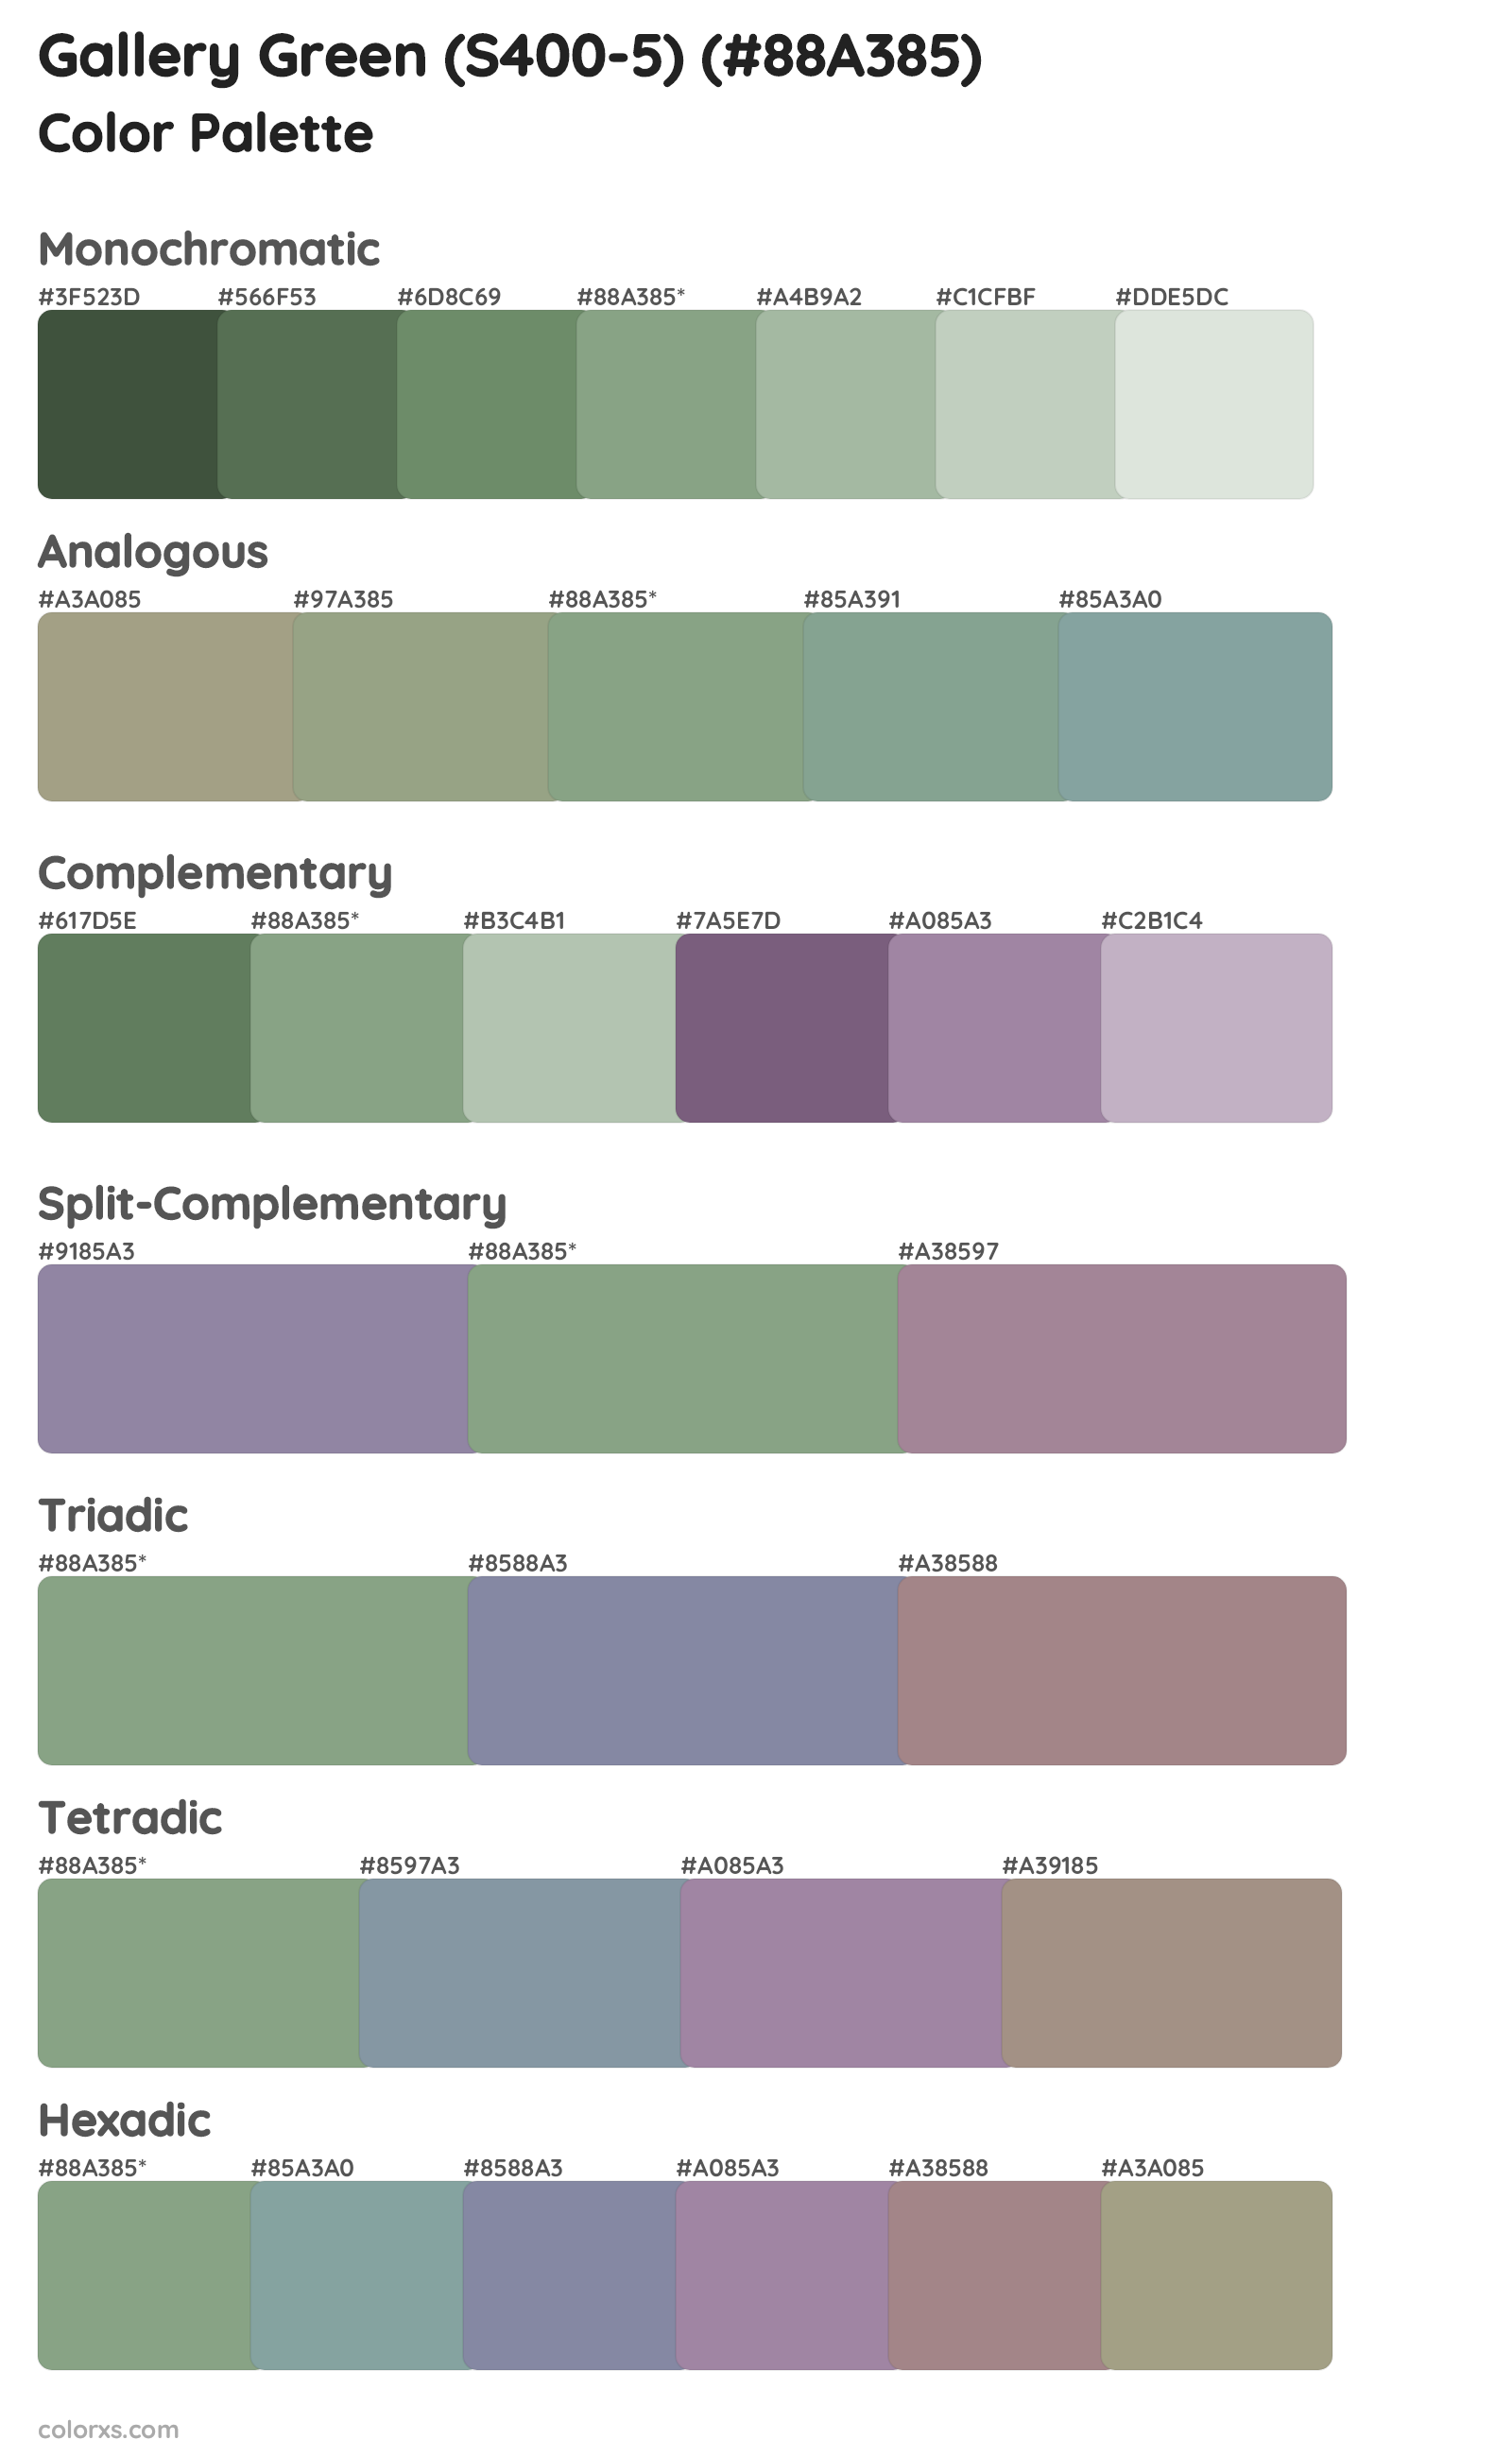 Gallery Green (S400-5) Color Scheme Palettes